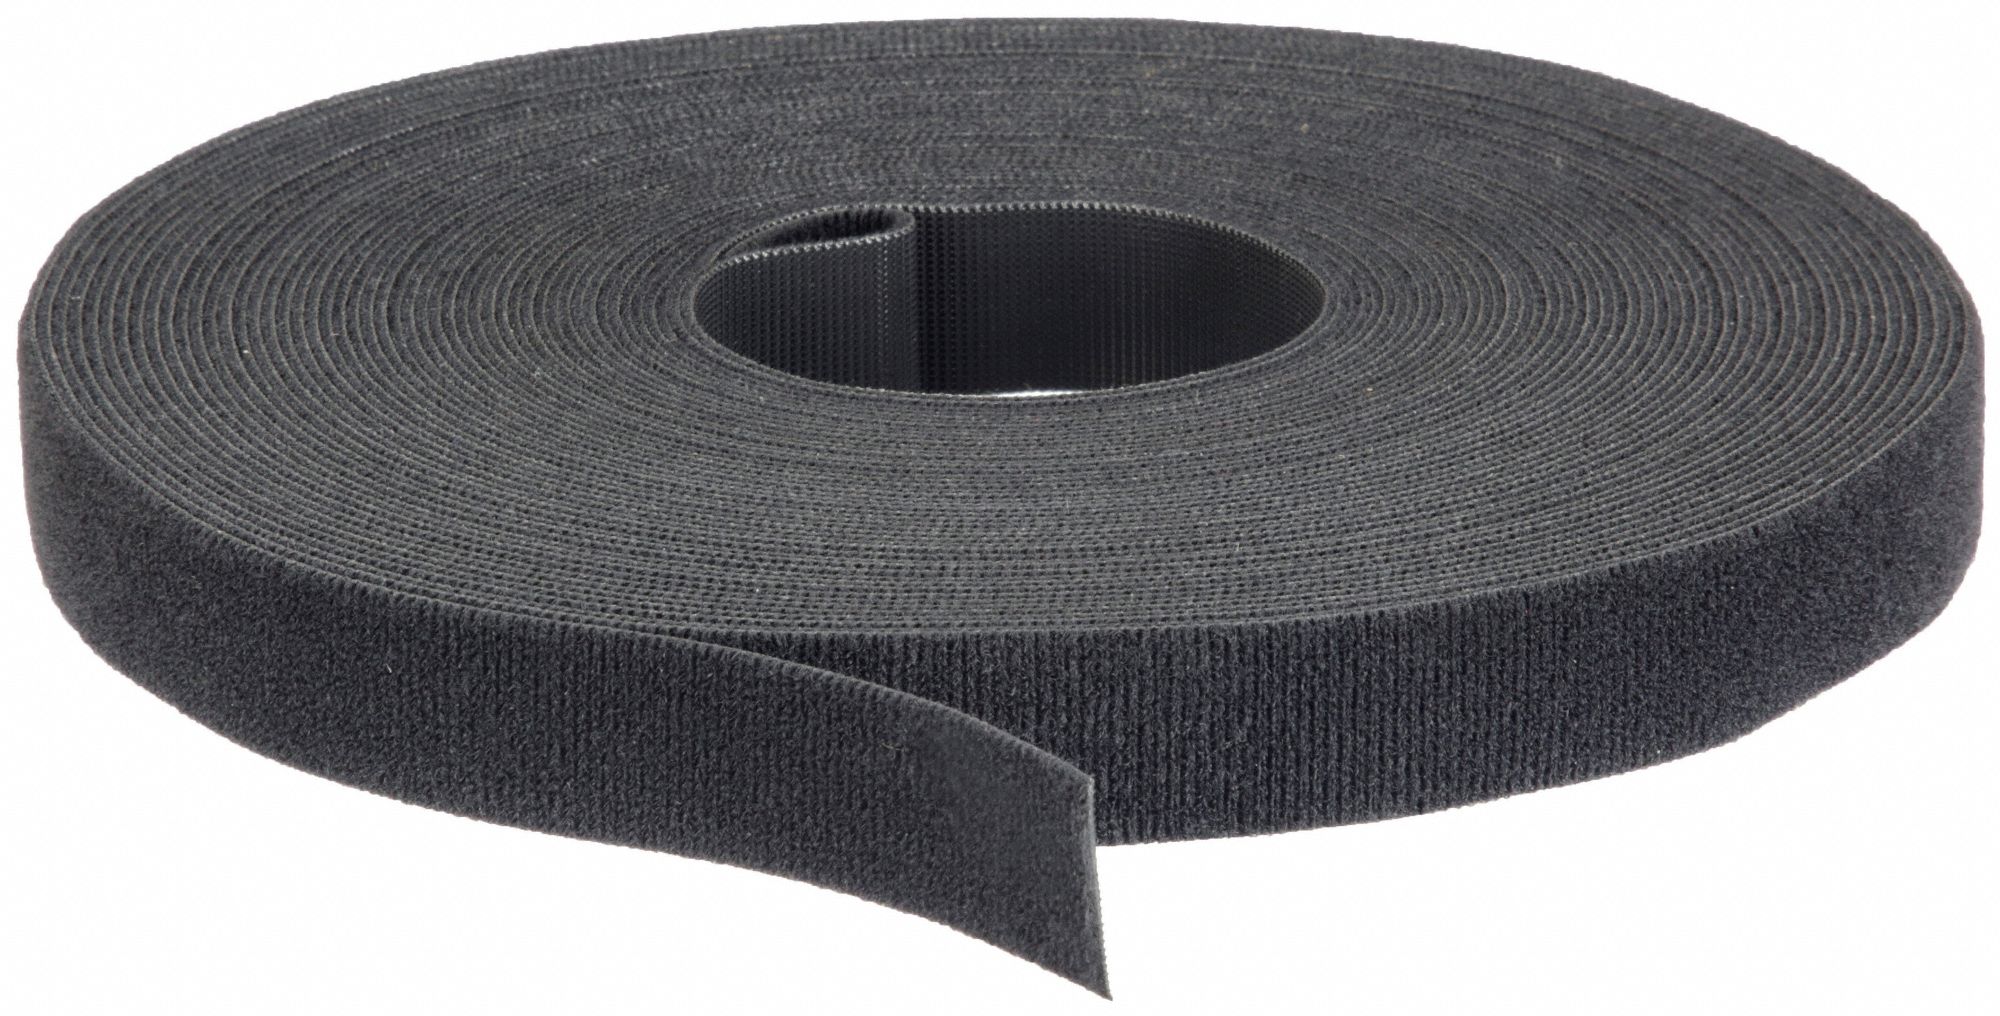 VELCRO BRAND, 75 ft Lg, 1 in Wd, Hook-and-Loop Cable Tie Roll -  5JLE8